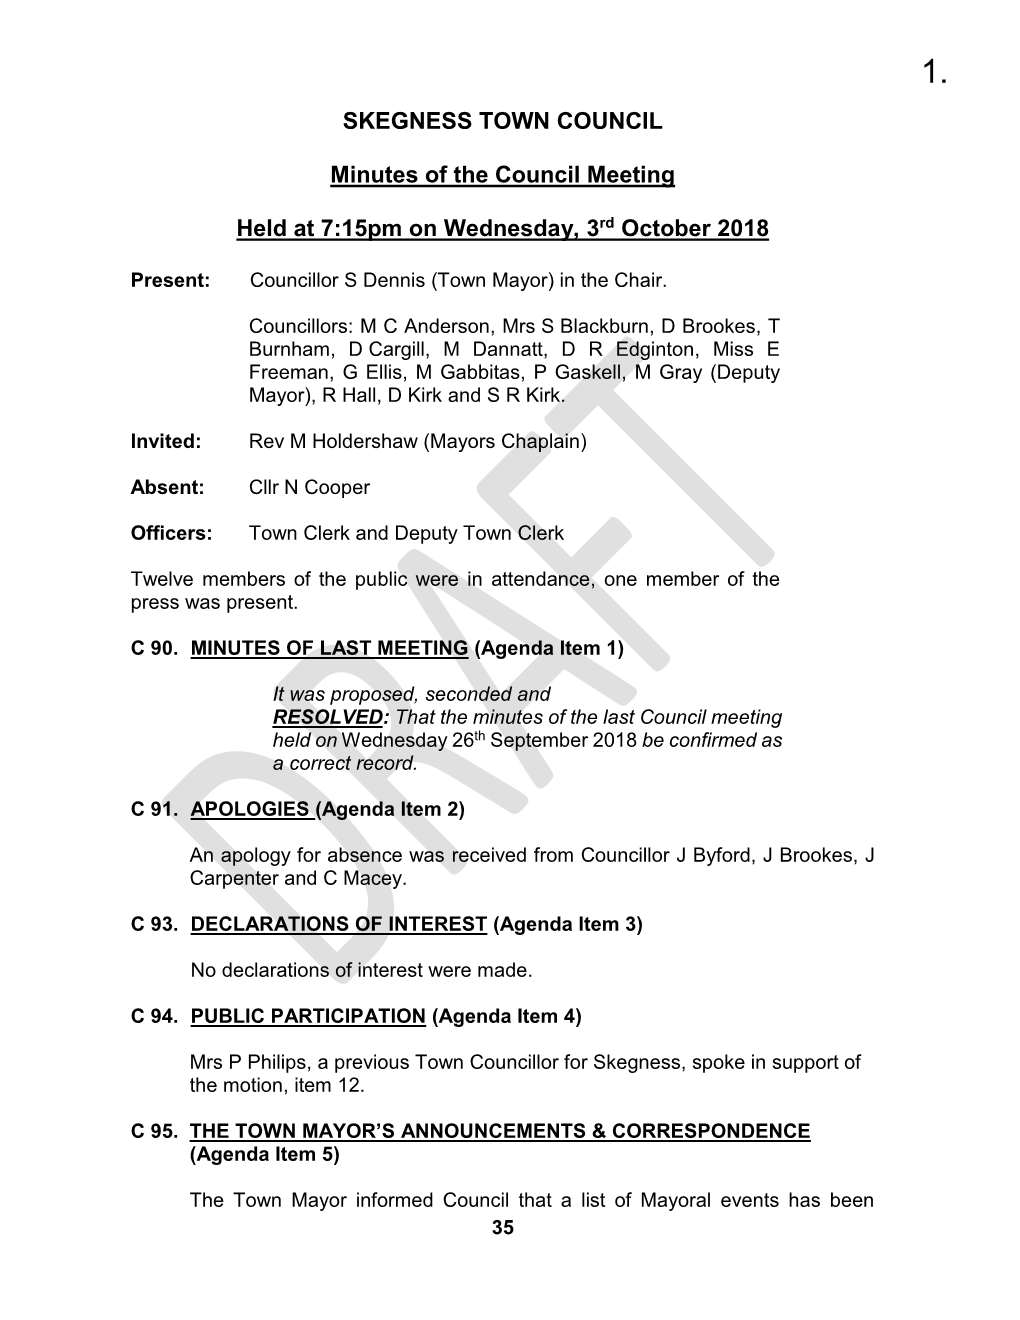 SKEGNESS TOWN COUNCIL Minutes of the Council Meeting Held at 7